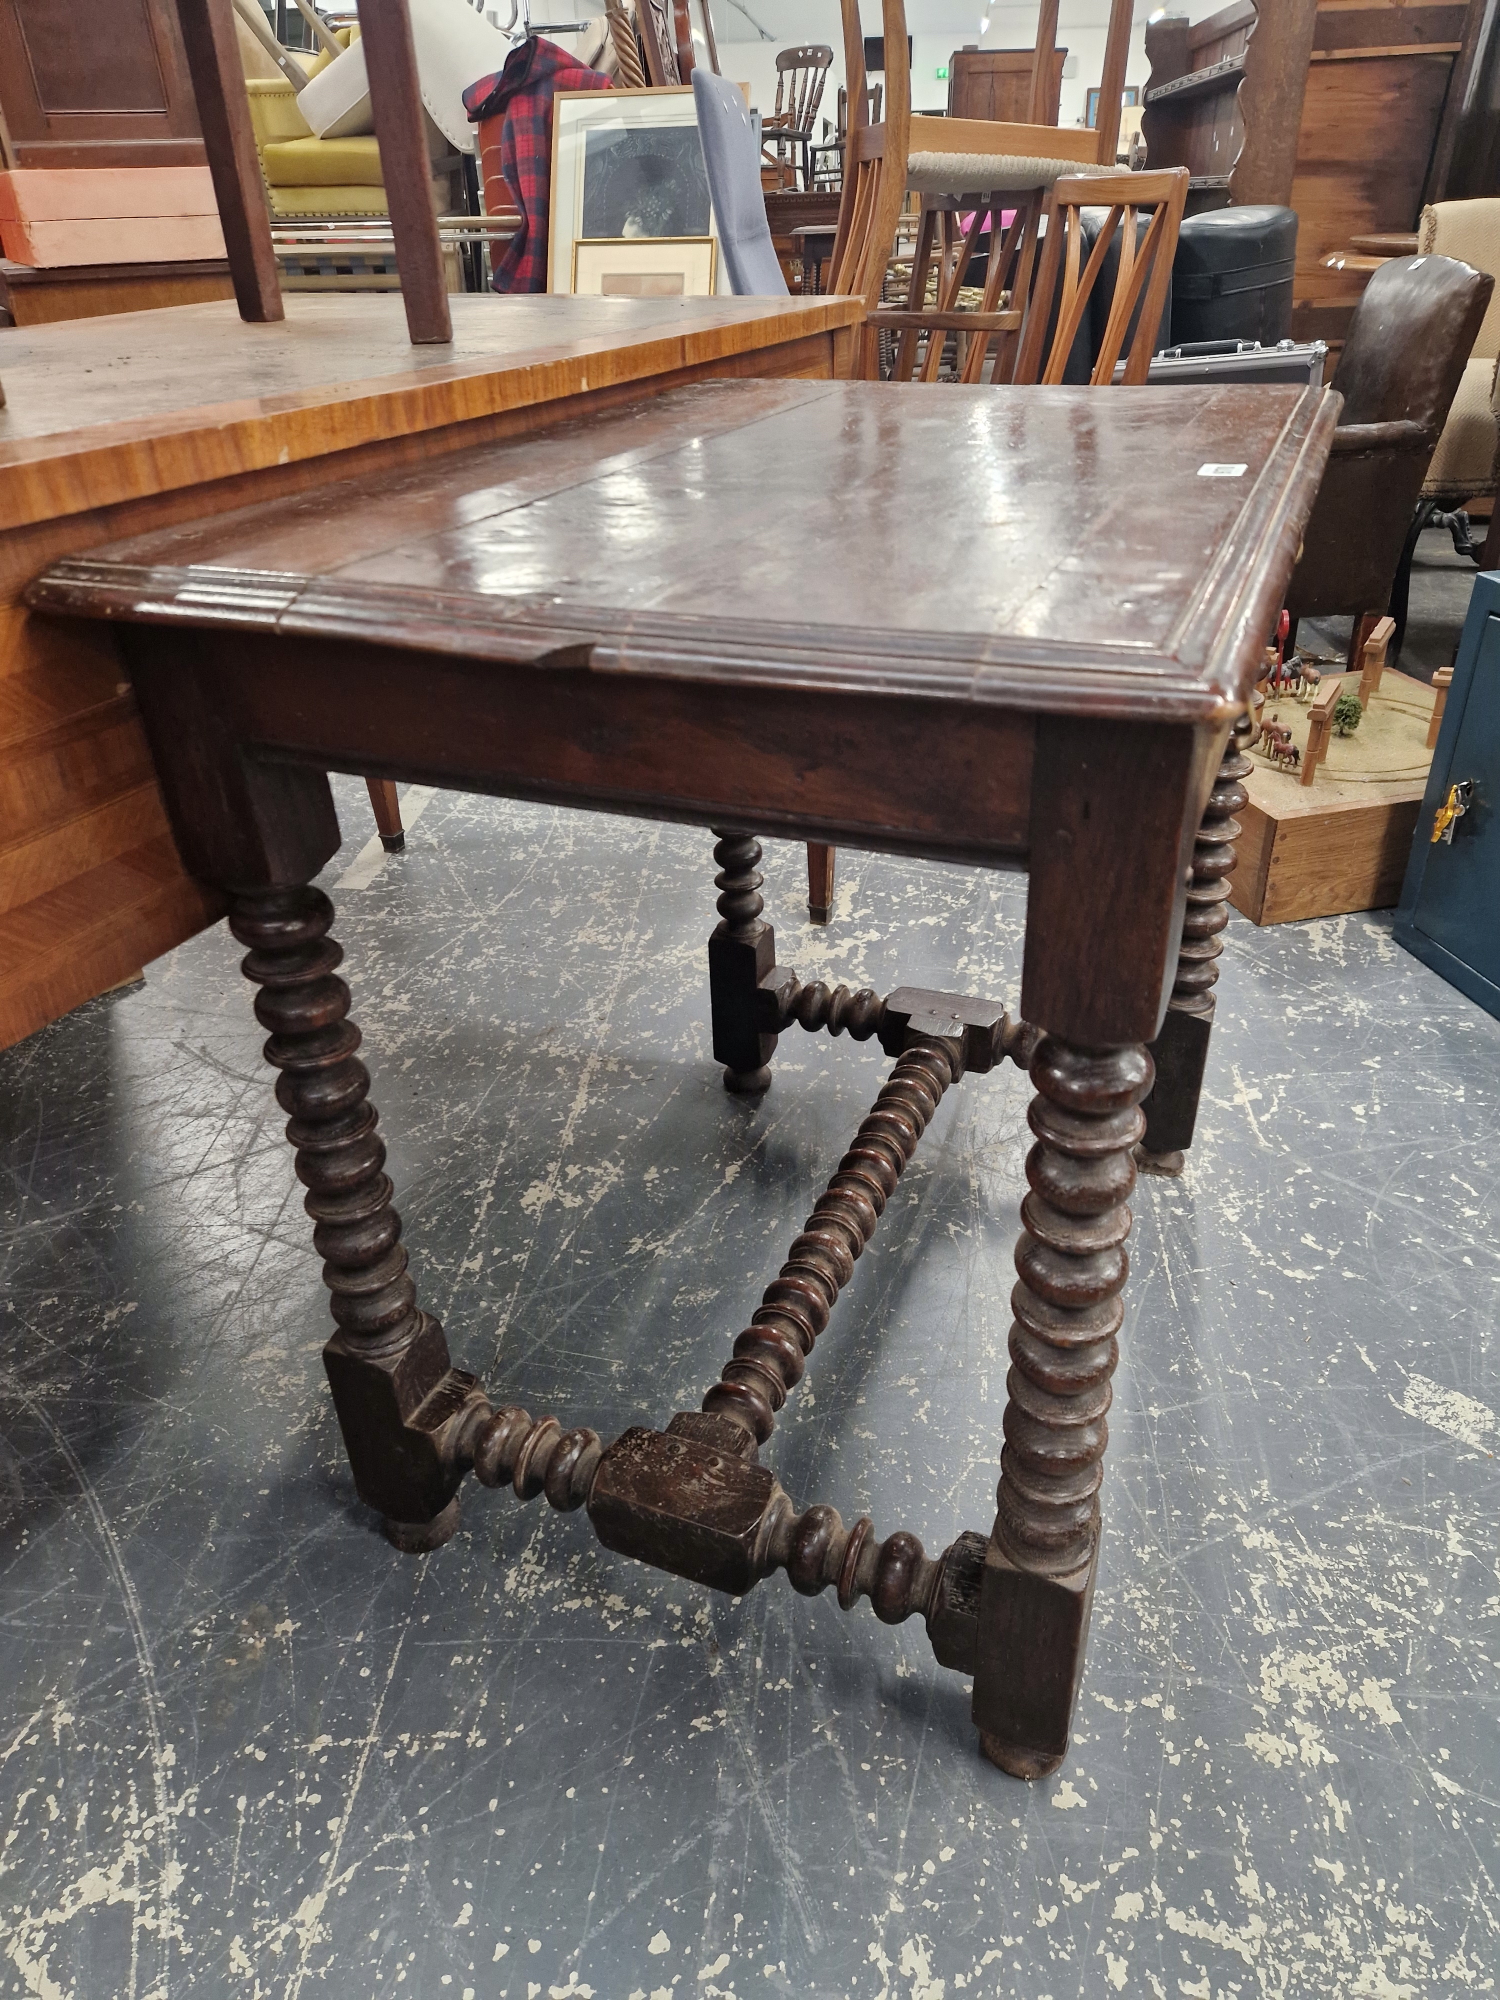 AN 18th C. OAK SIDE TABLE WITH A SINGLE DRAWER ABOVE THE RING AND BOBBIN TURNED LEGS. W 77 x 52 x - Image 3 of 5